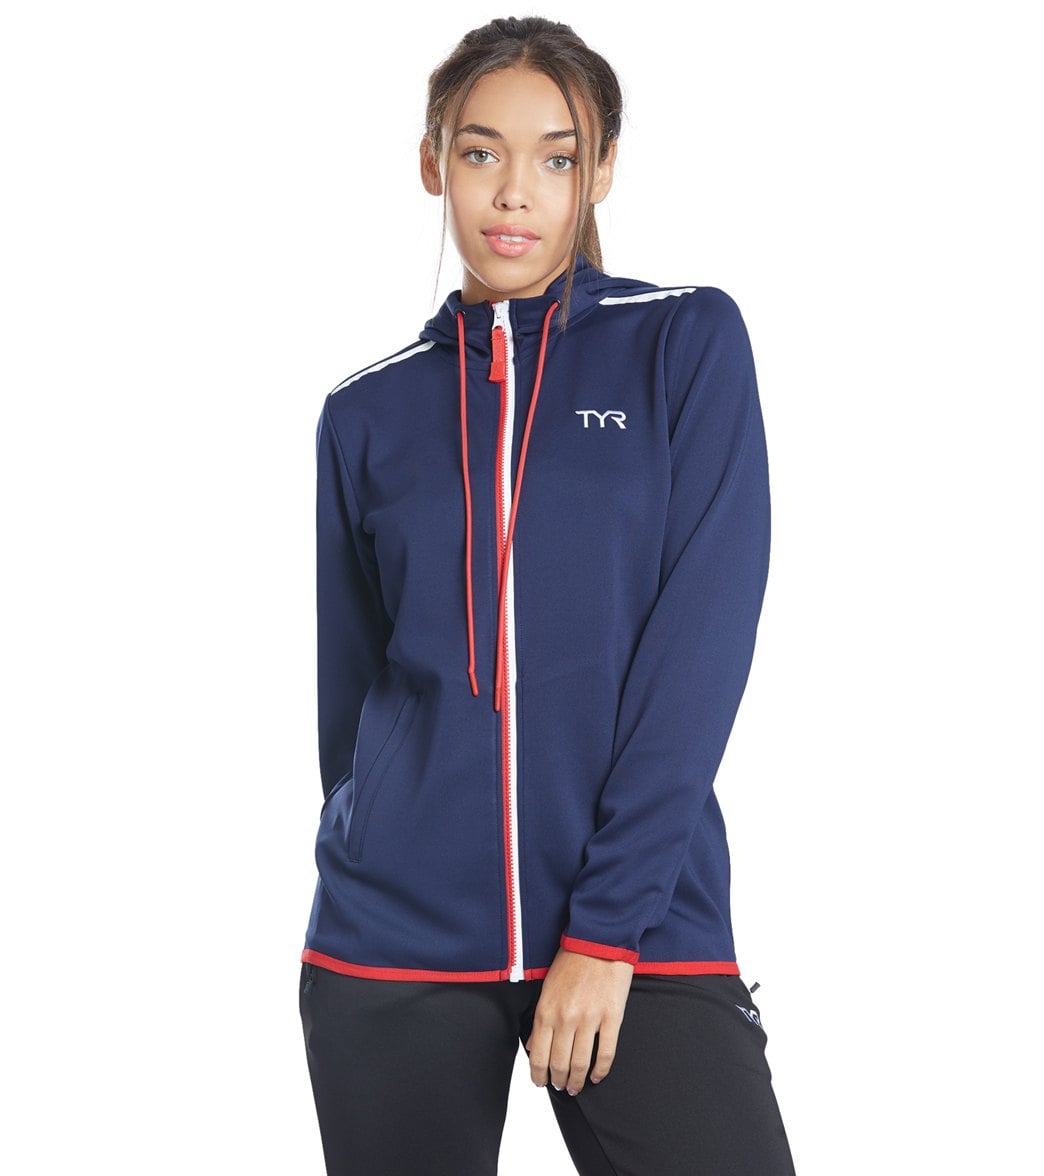 TYR Women's Team Full Zip Hoodie - Red/White/Blue Large Size Large Polyester - Swimoutlet.com